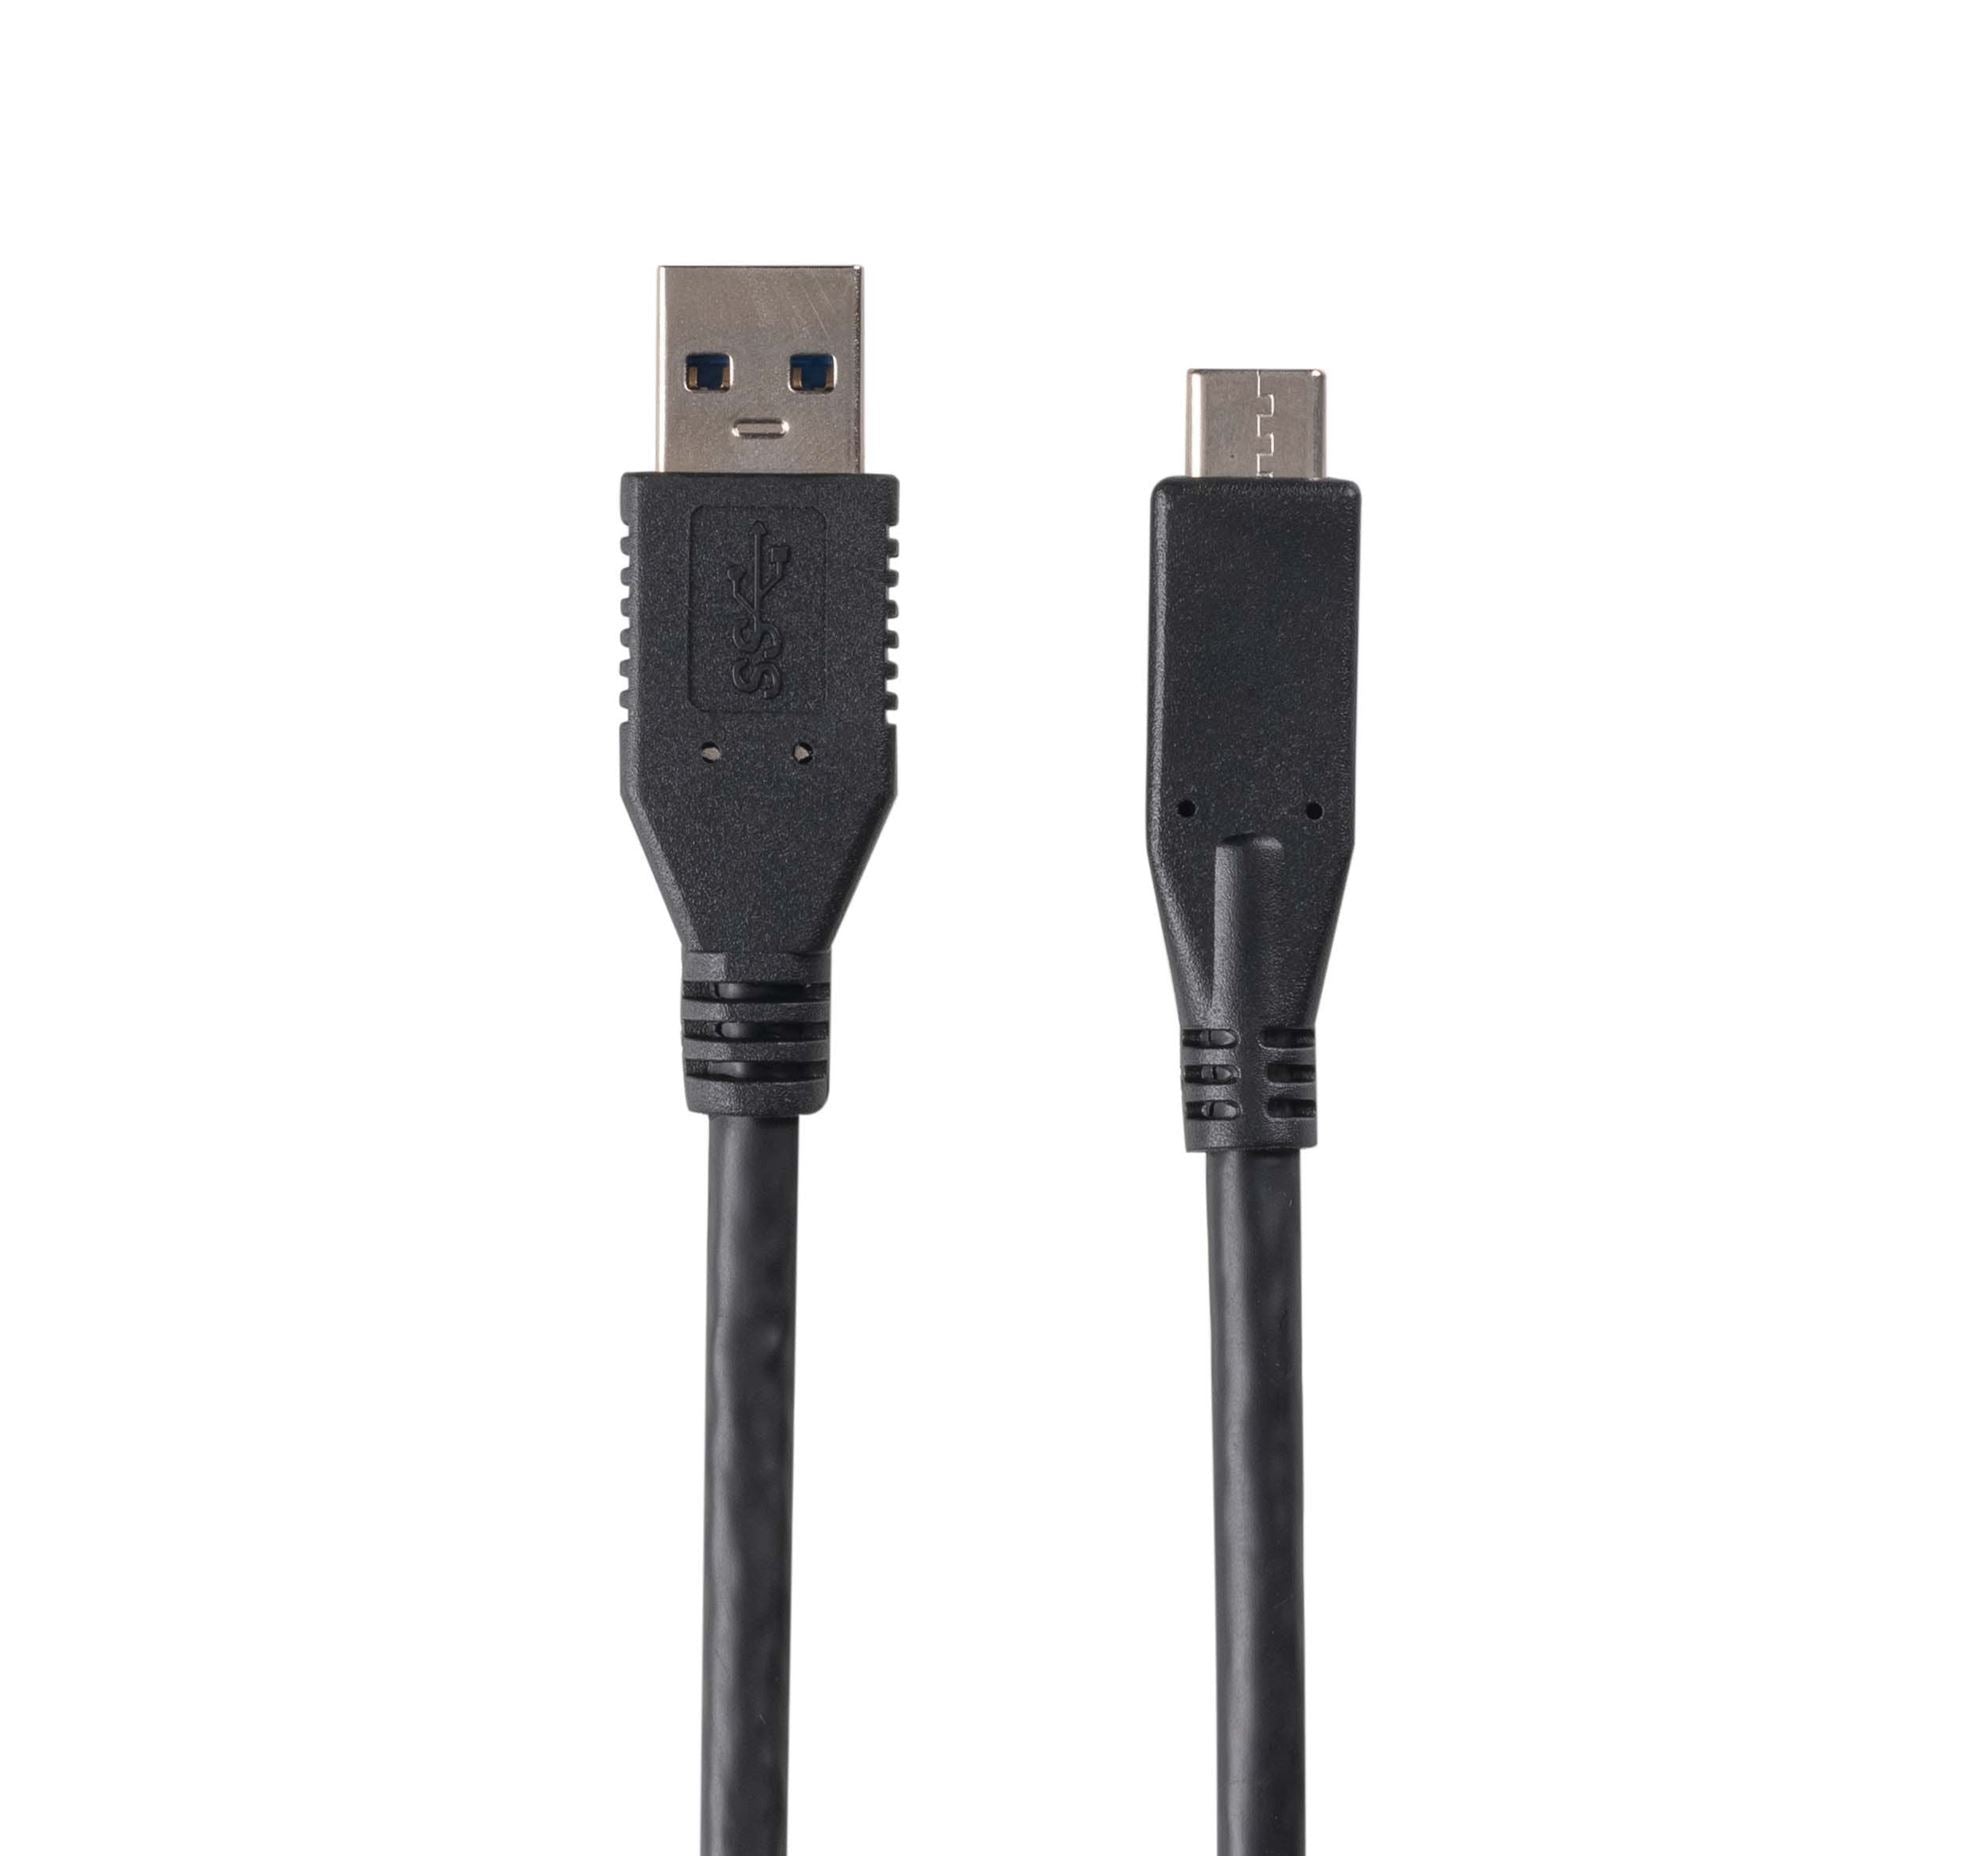 DYNAMIX_1M,_USB_3.1_USB-C_Male_to_USB-A_Male_Cable._Black_Colour._Up_to_10G_Data_Transfer_Speed,_Supports_3A_Current. 1136